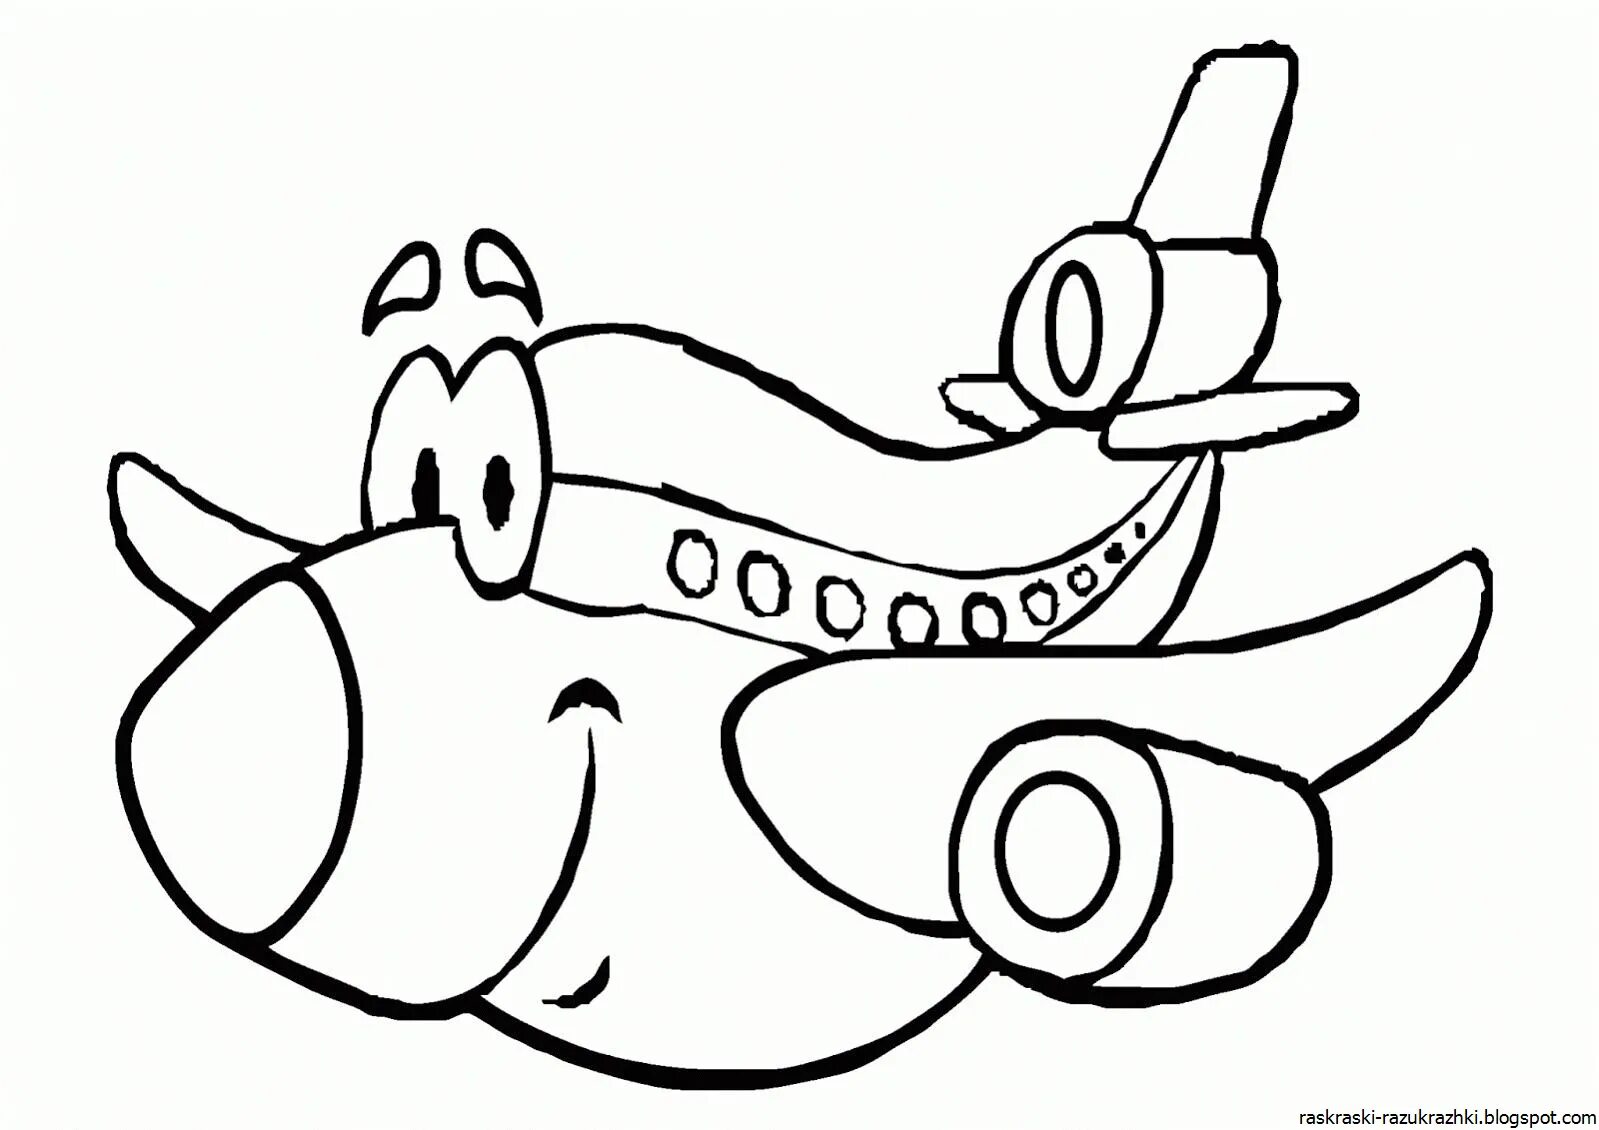 Airplane for kids #3